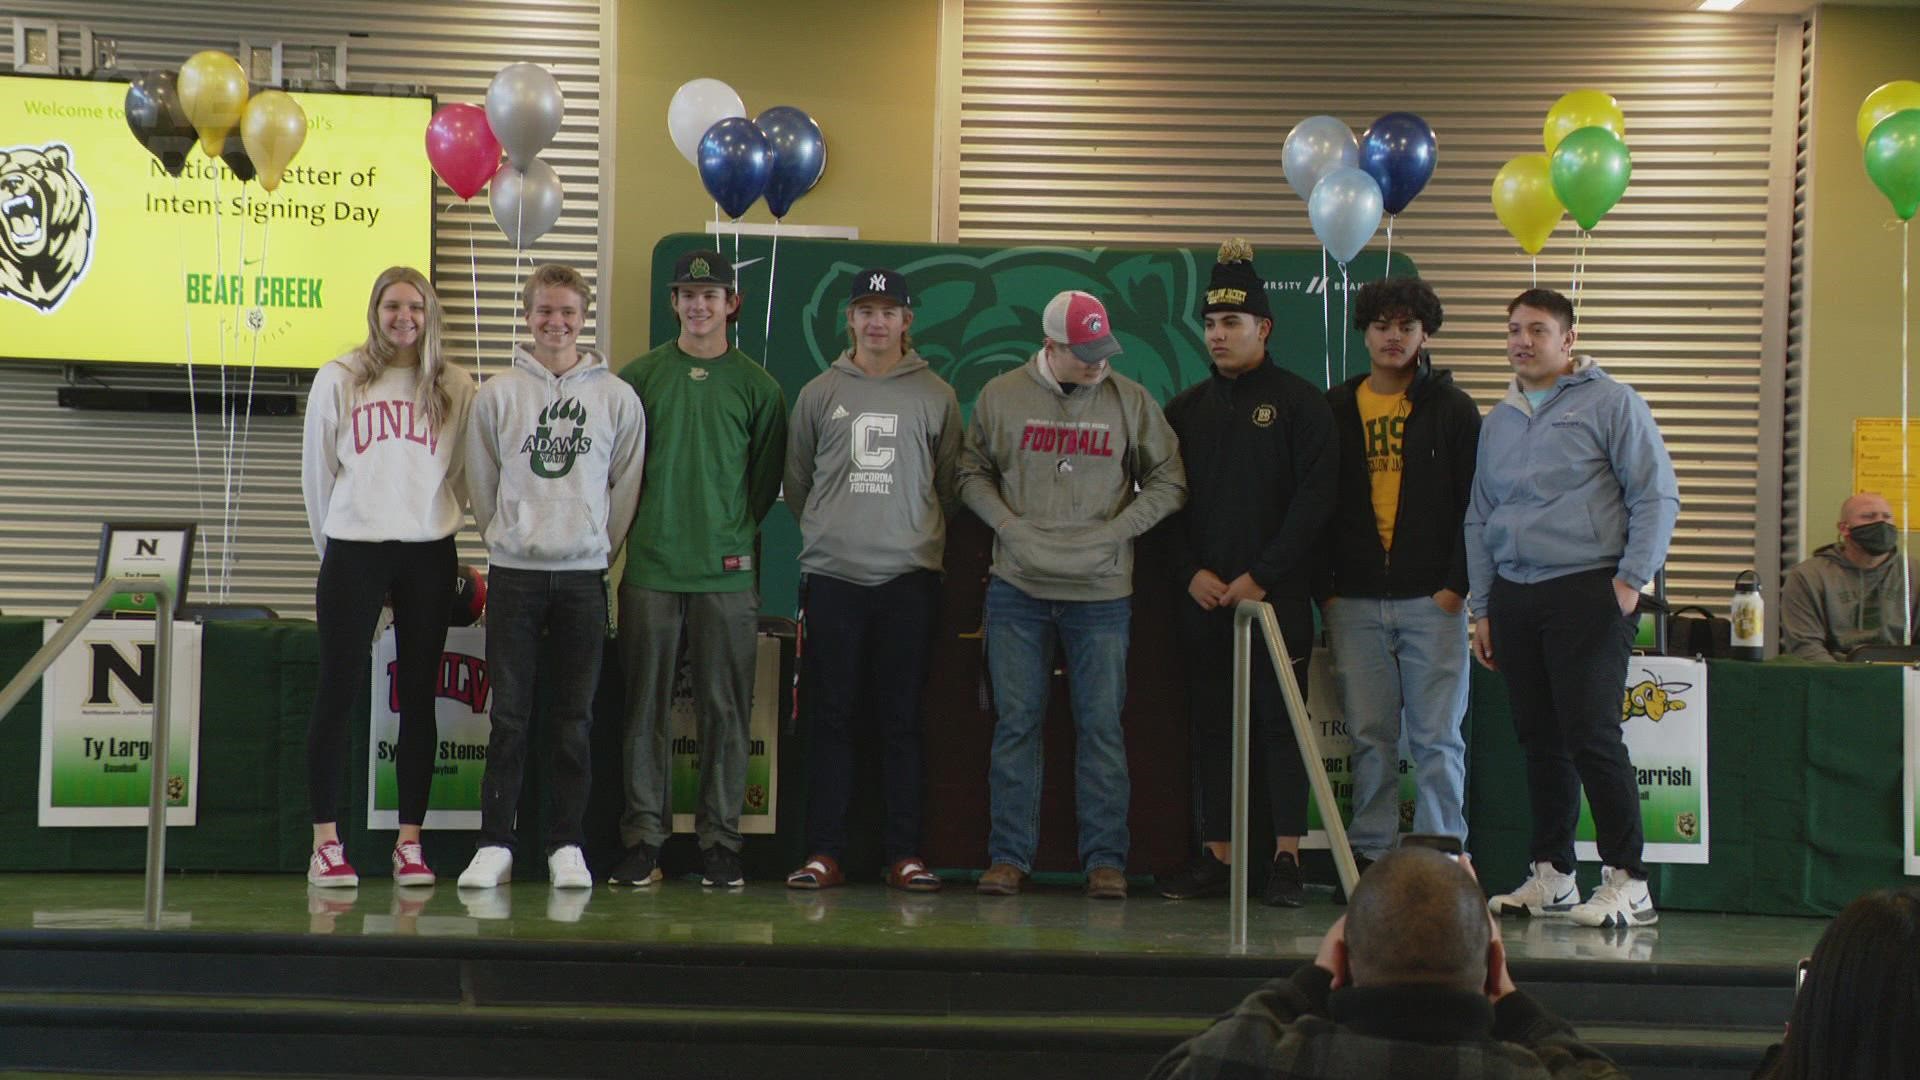 Watch as student-athletes from Bear Creek High School sign their National Letters of Intent to play at college and reflect on their careers